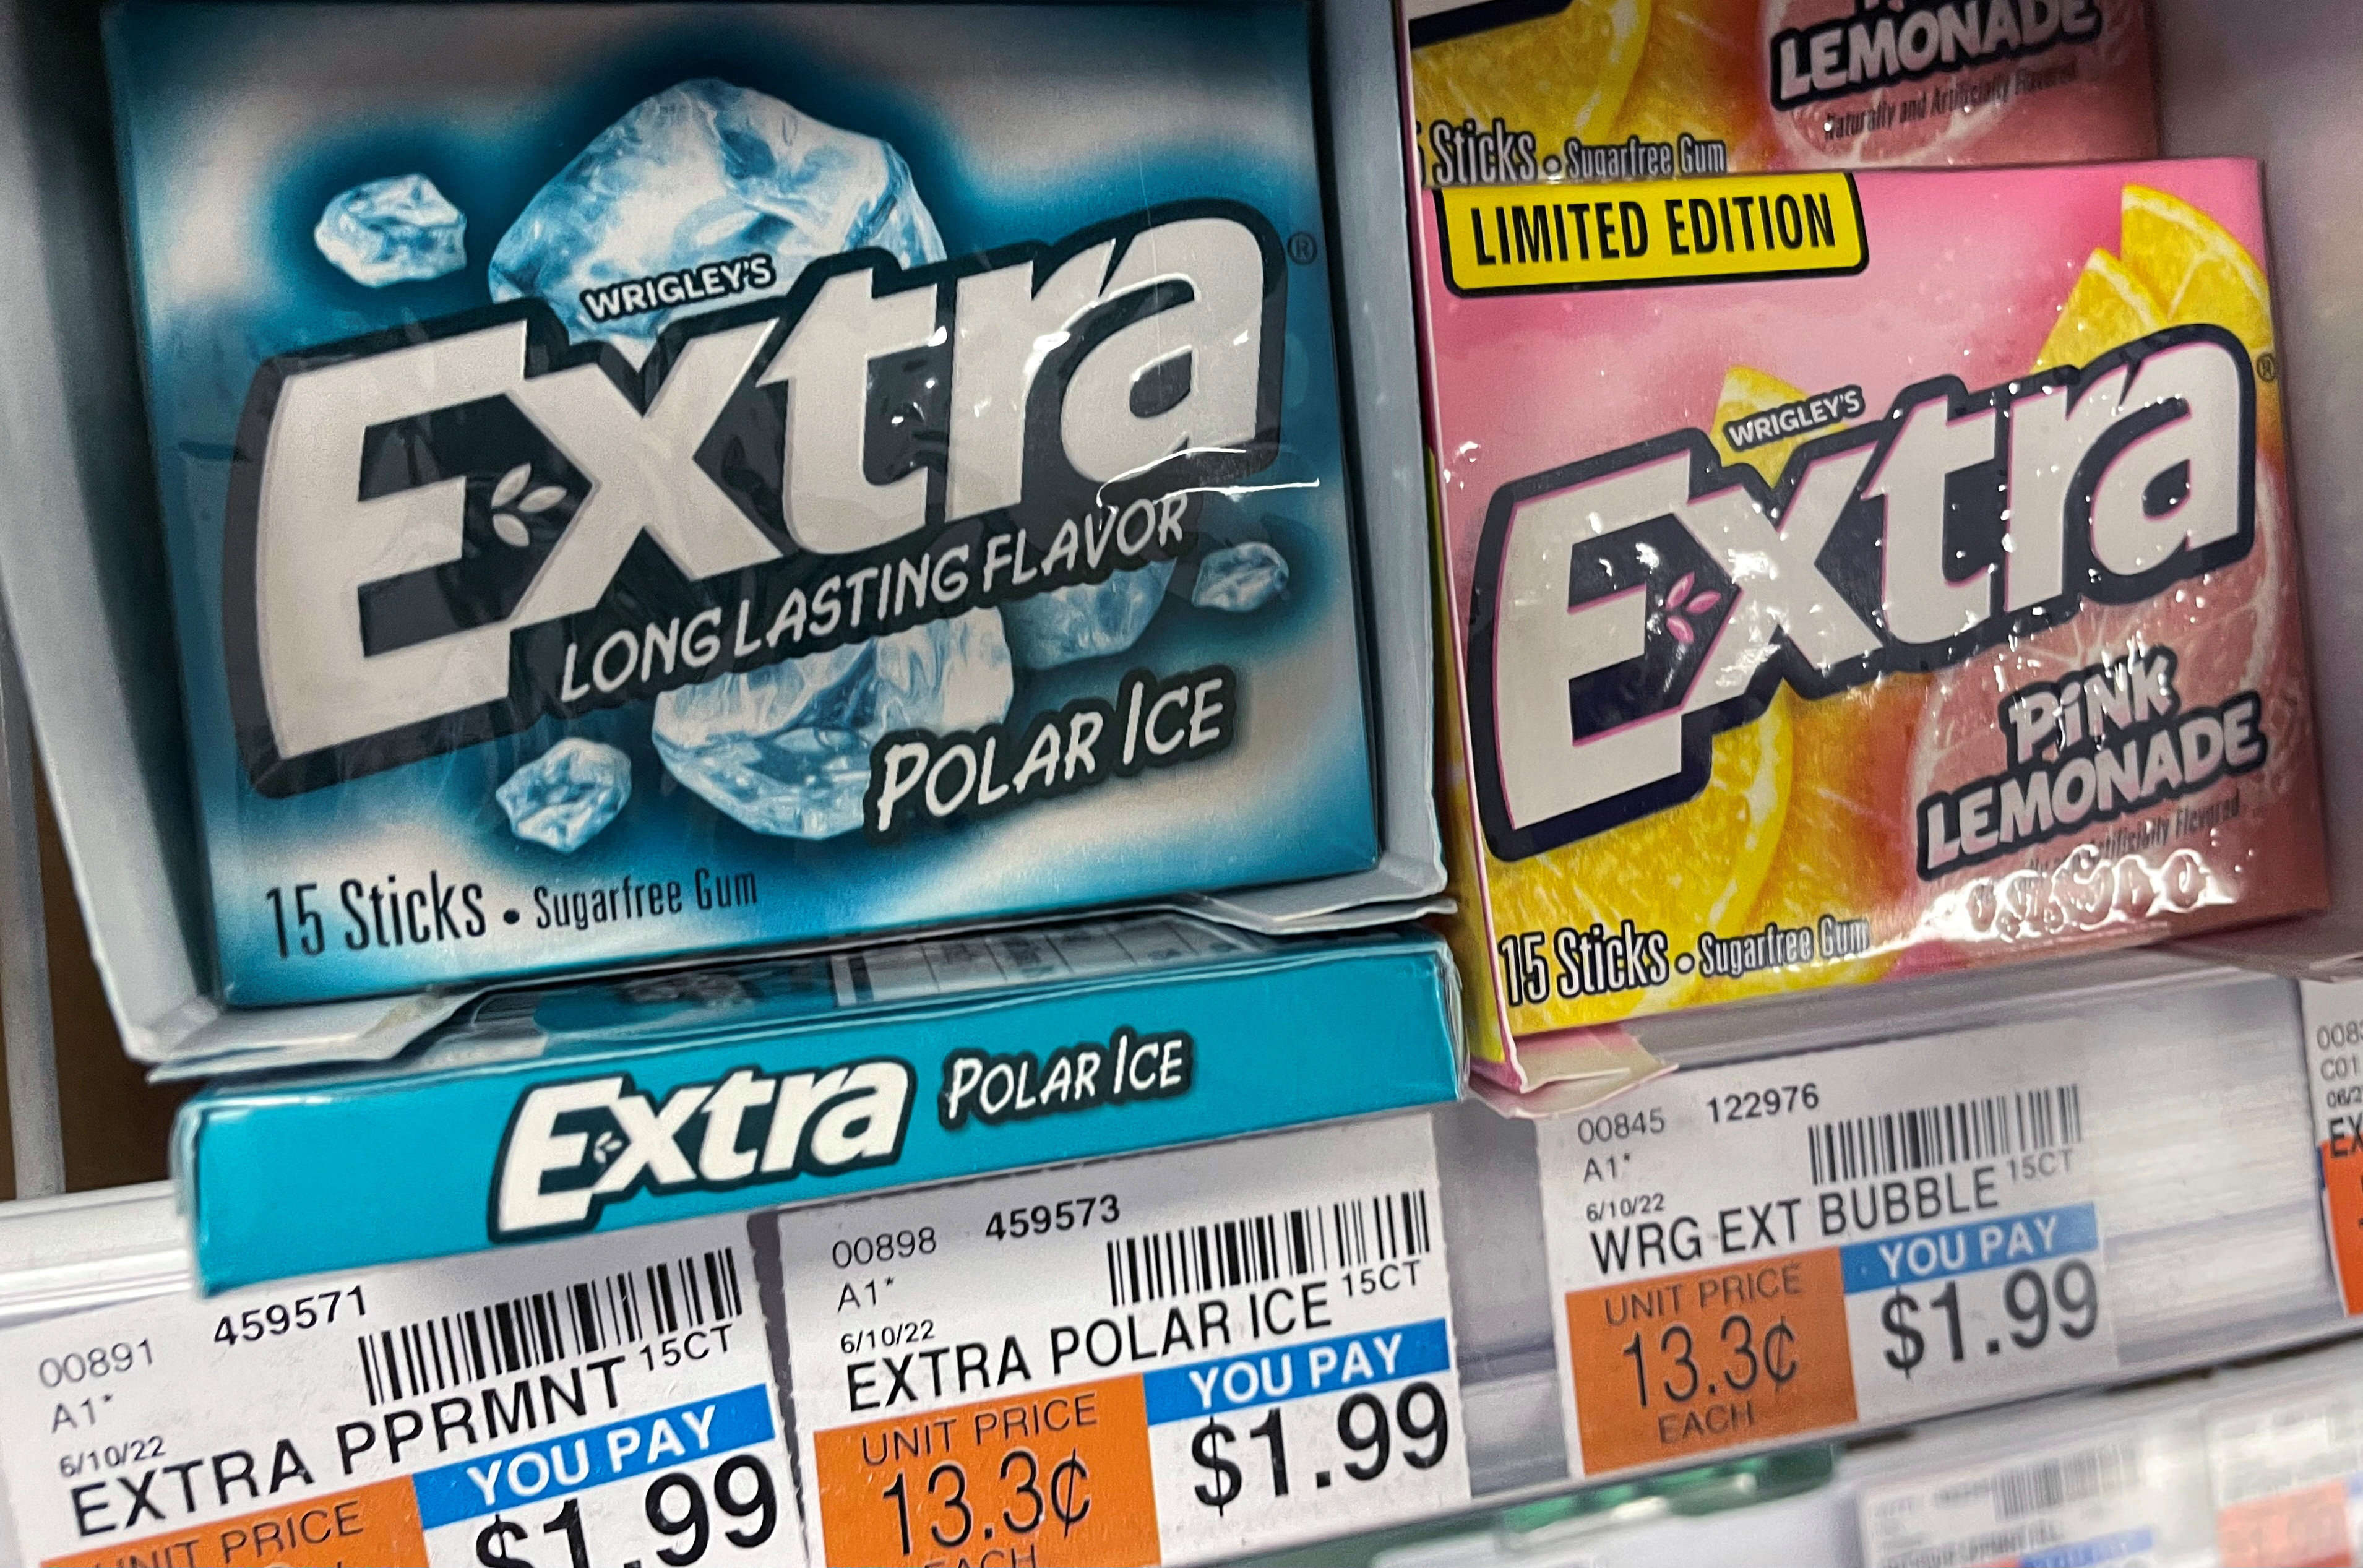 Packs of Wrigley's Extra gum are seen on display at a store in New York City